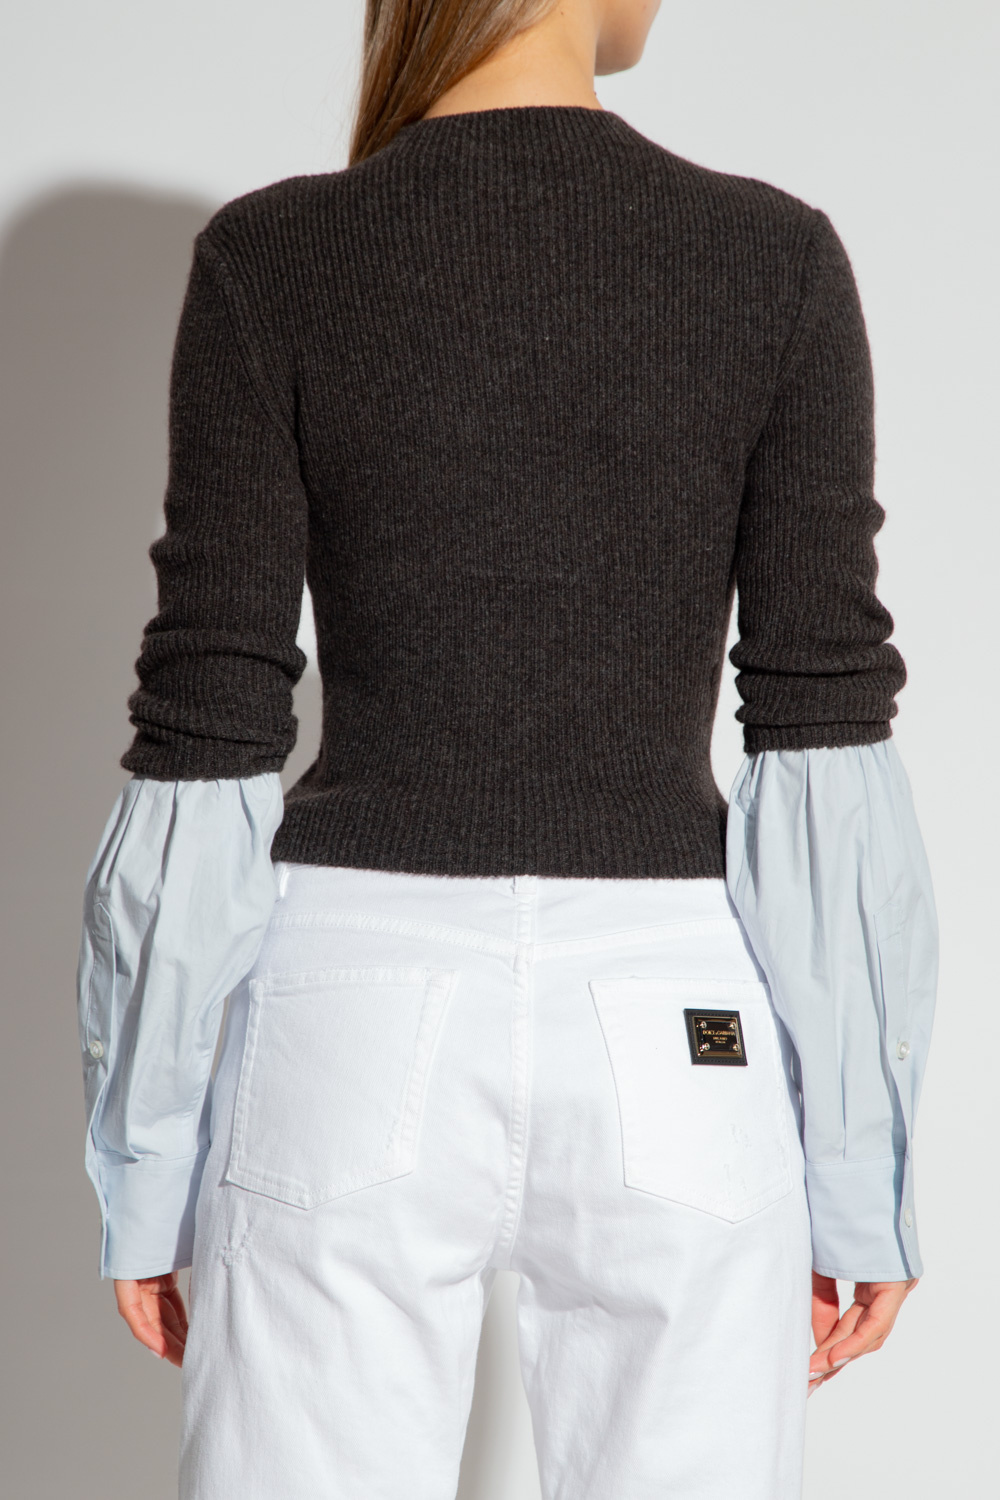 T by Alexander Wang Layered sweater